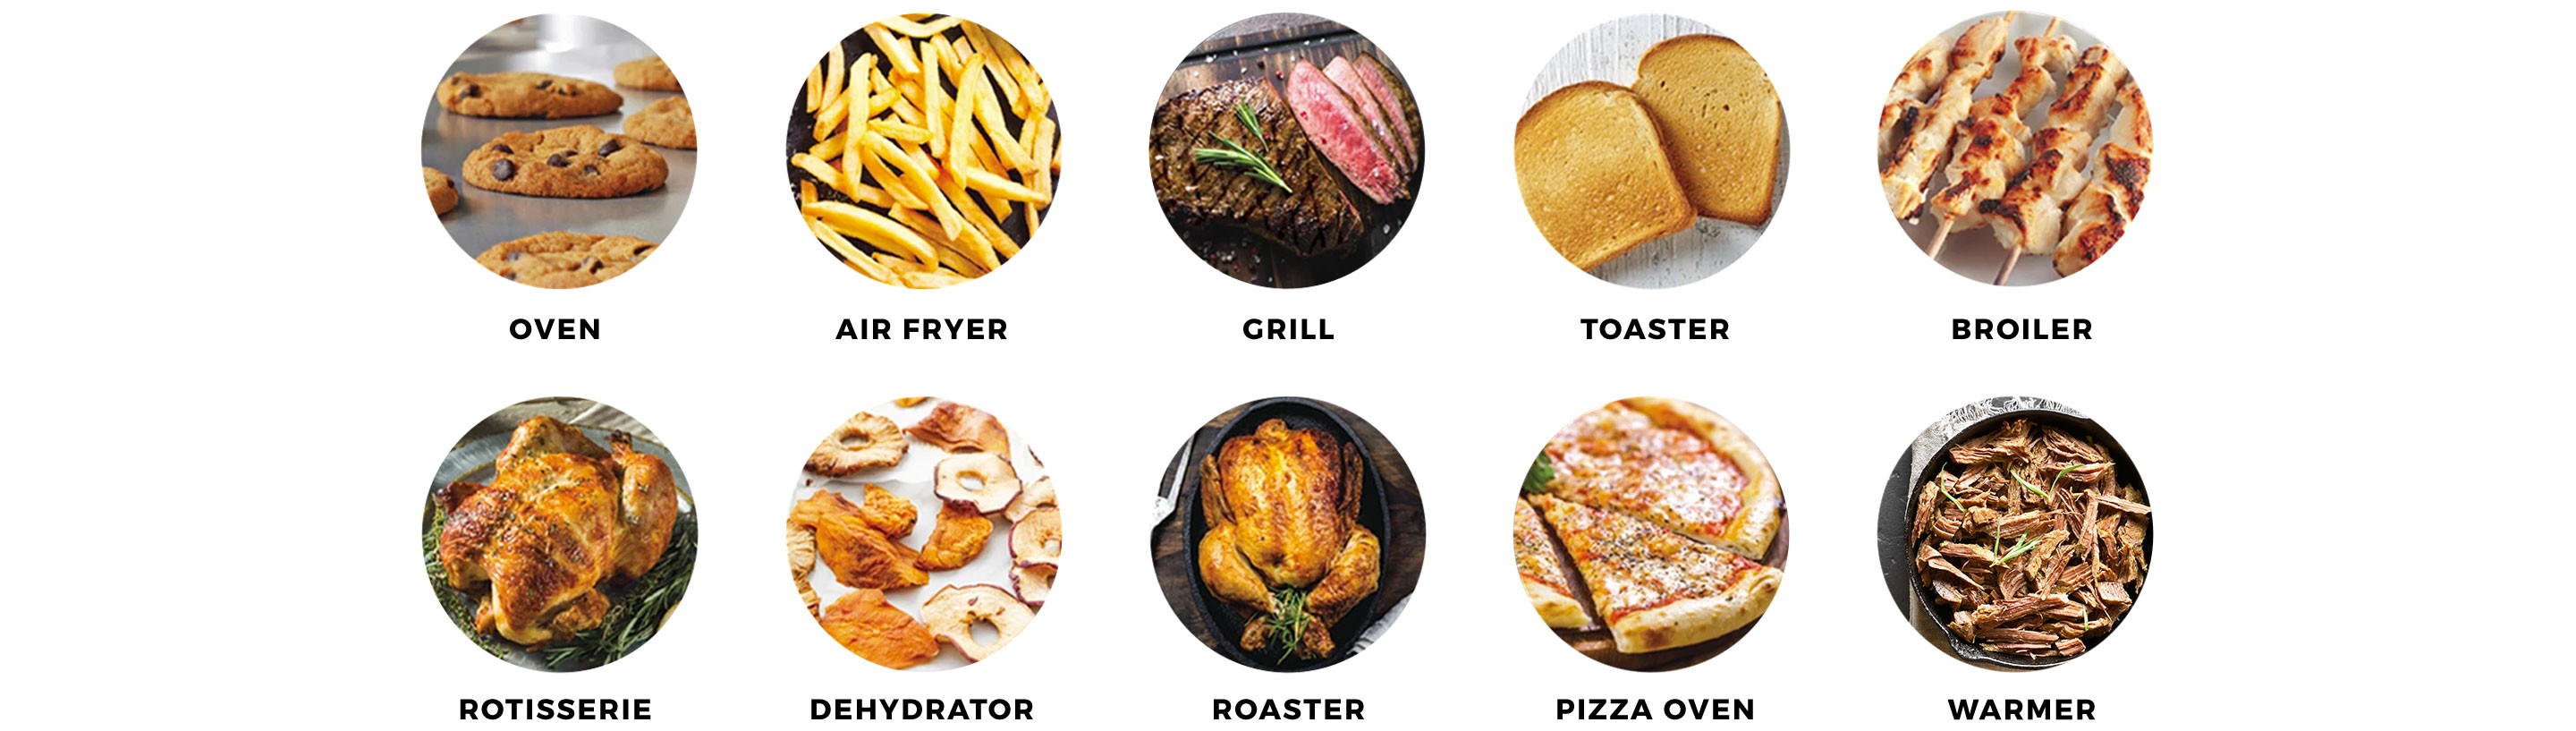 10-in-1: air fry, grill, bake, toast, roast, braise, sear, rotisserie, dehydrate, and broil